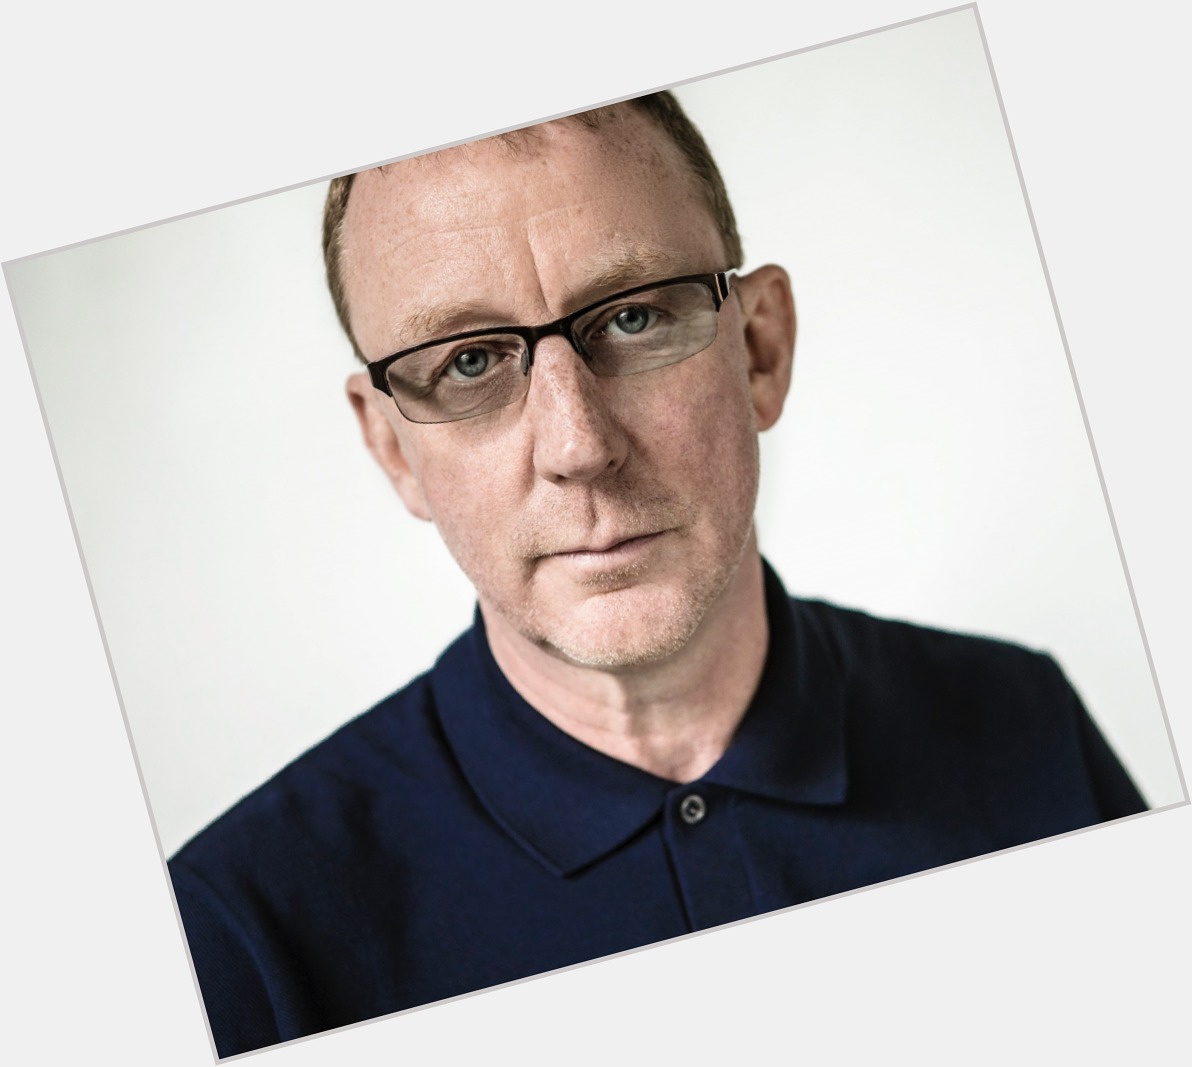 Https://fanpagepress.net/m/D/Dave Rowntree New Pic 1